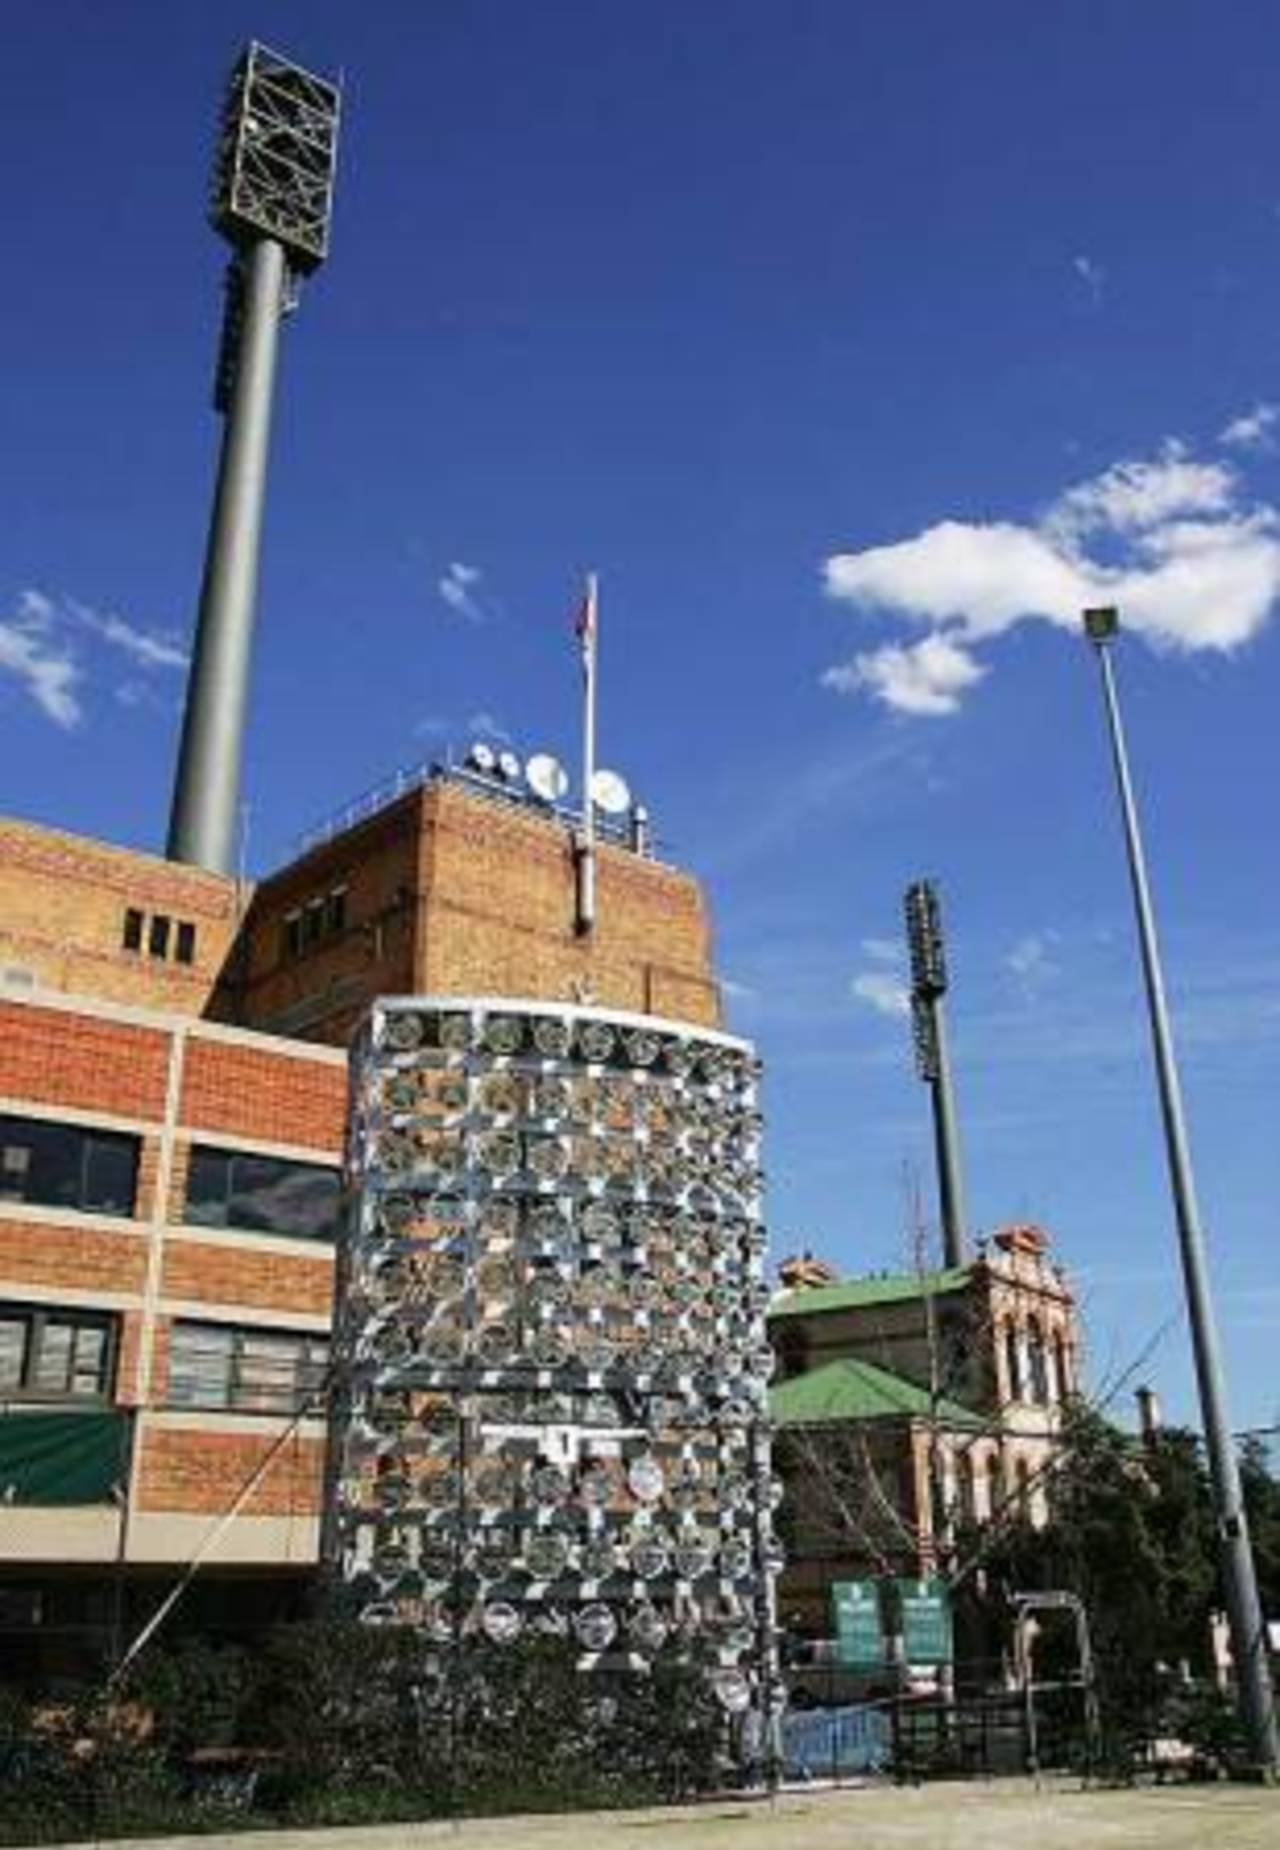 A new light tower awaits installation at the Sydney Cricket Ground, replacing the old towers which have stood for almost 29 years, August 29, 2007